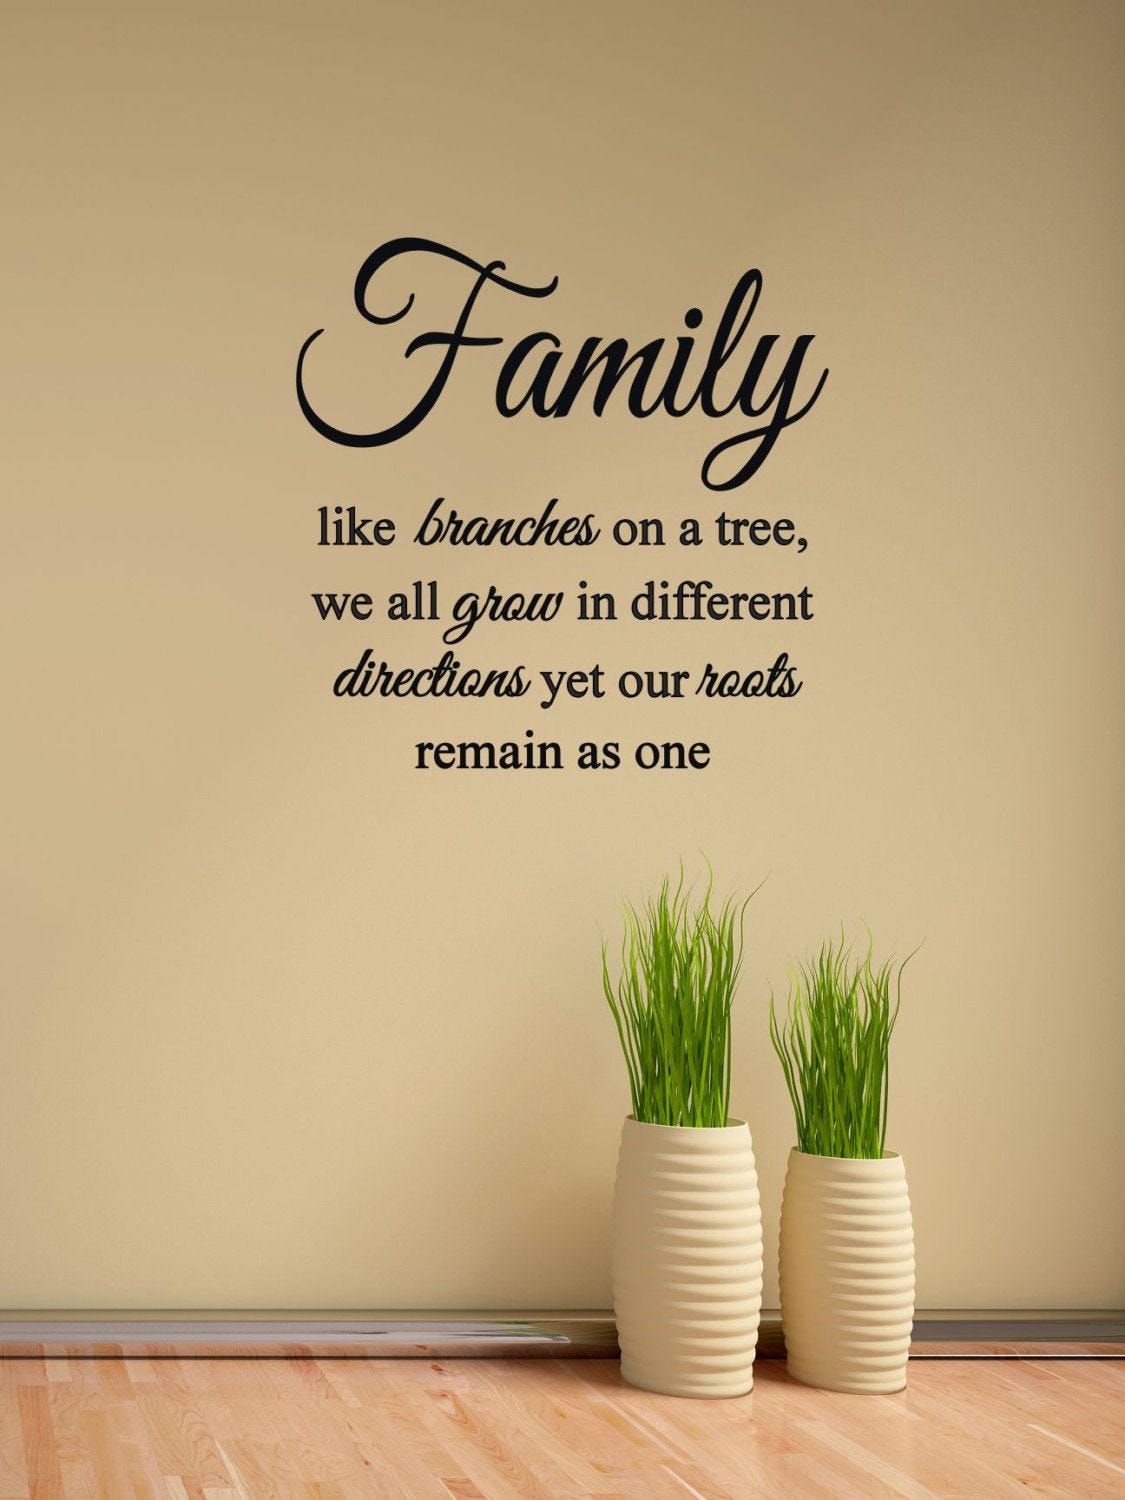 We are all family. 